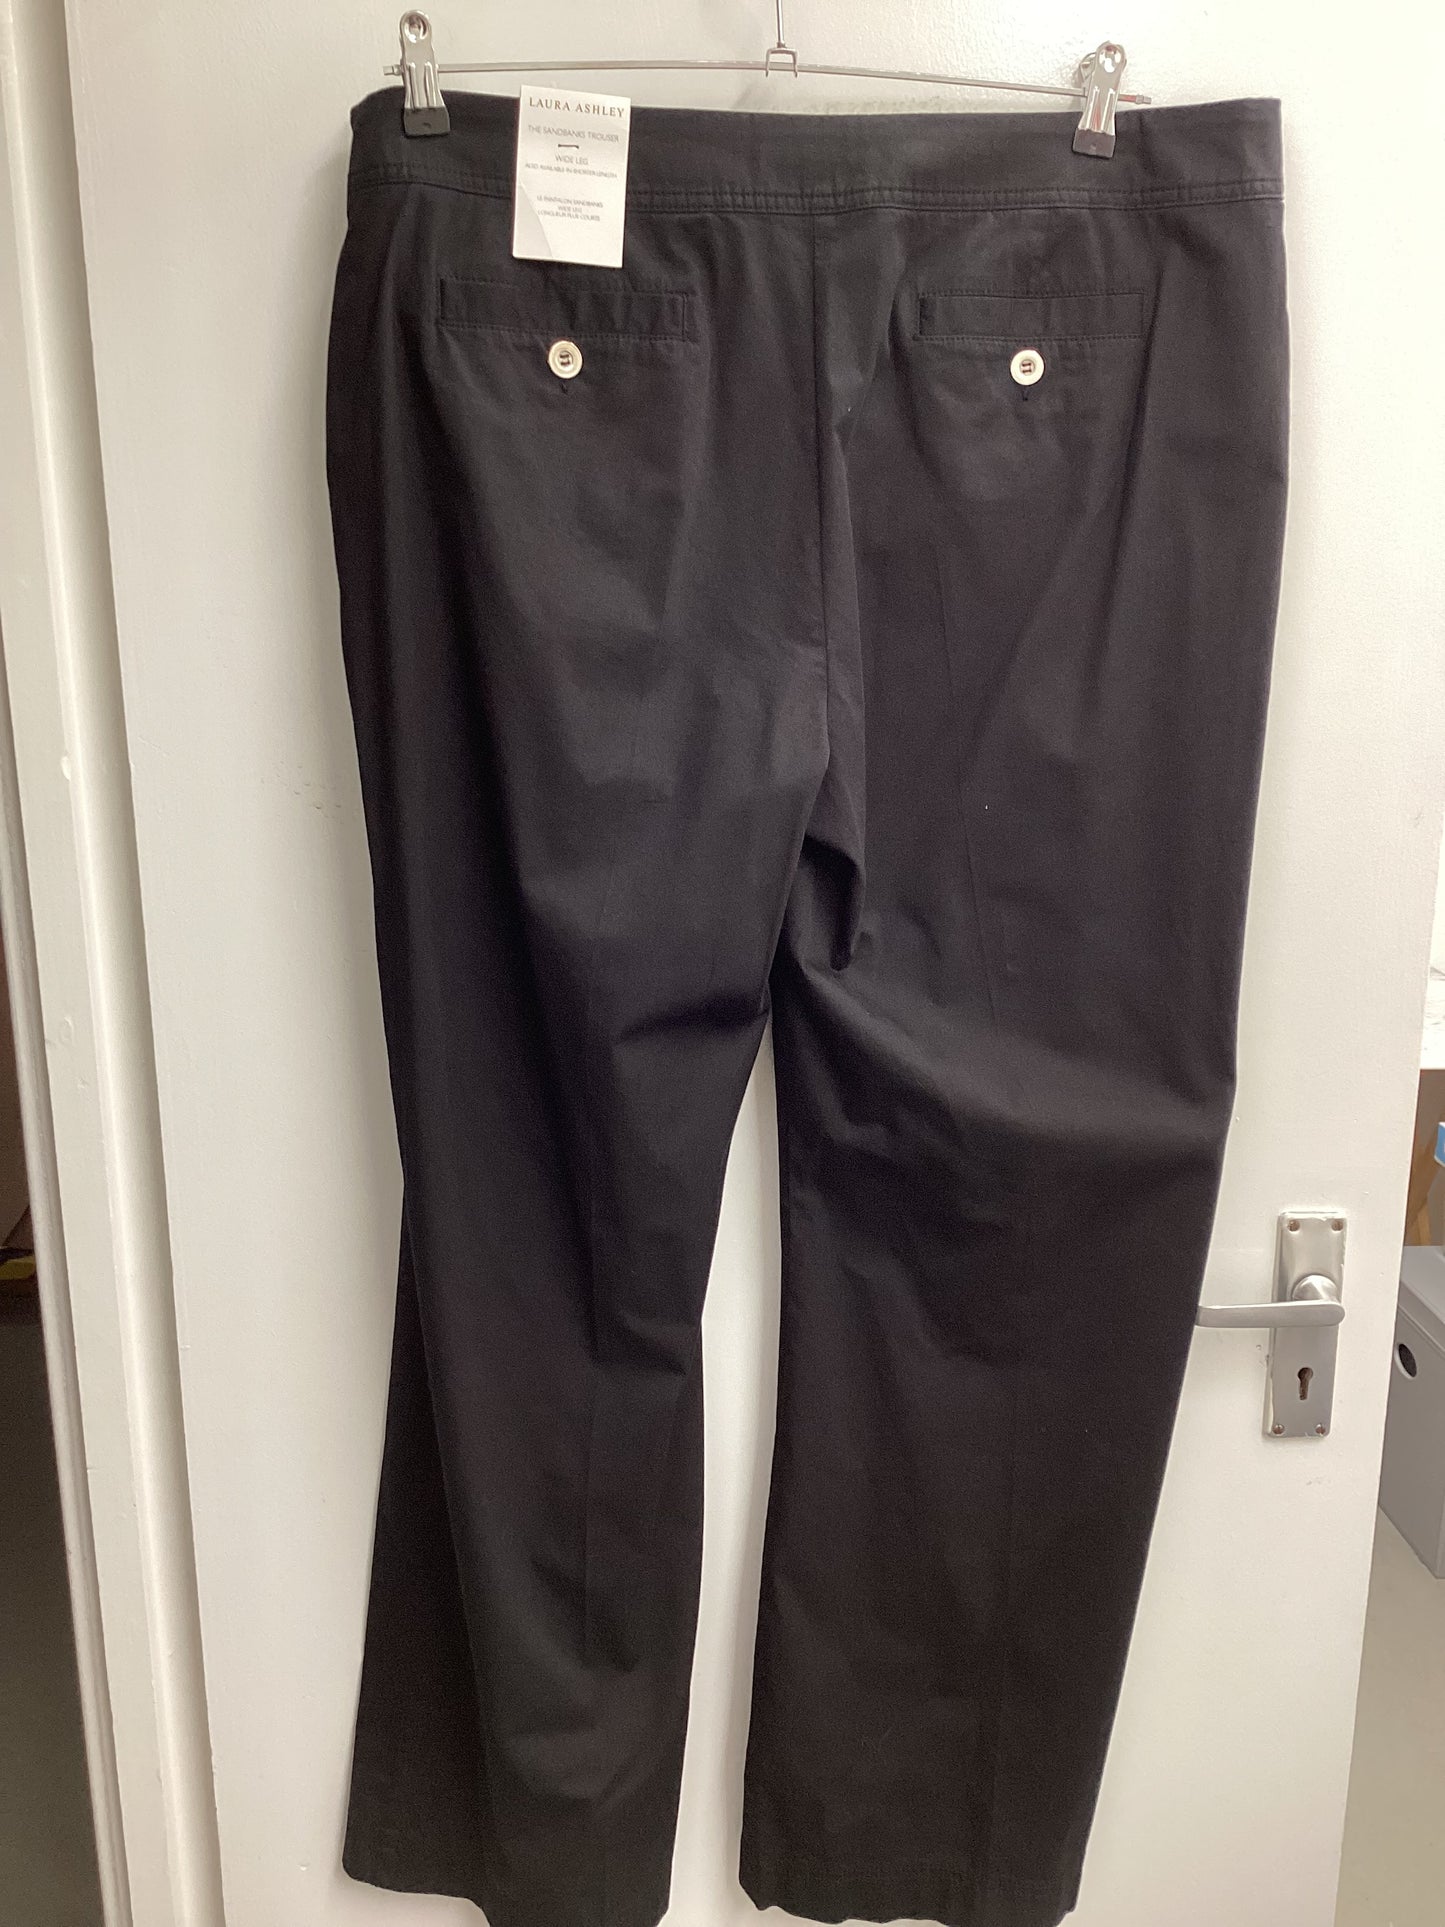 LAURA ASHLEY, New With Tags, Size 20, Black Trousers - Style: TK-448s|2PO